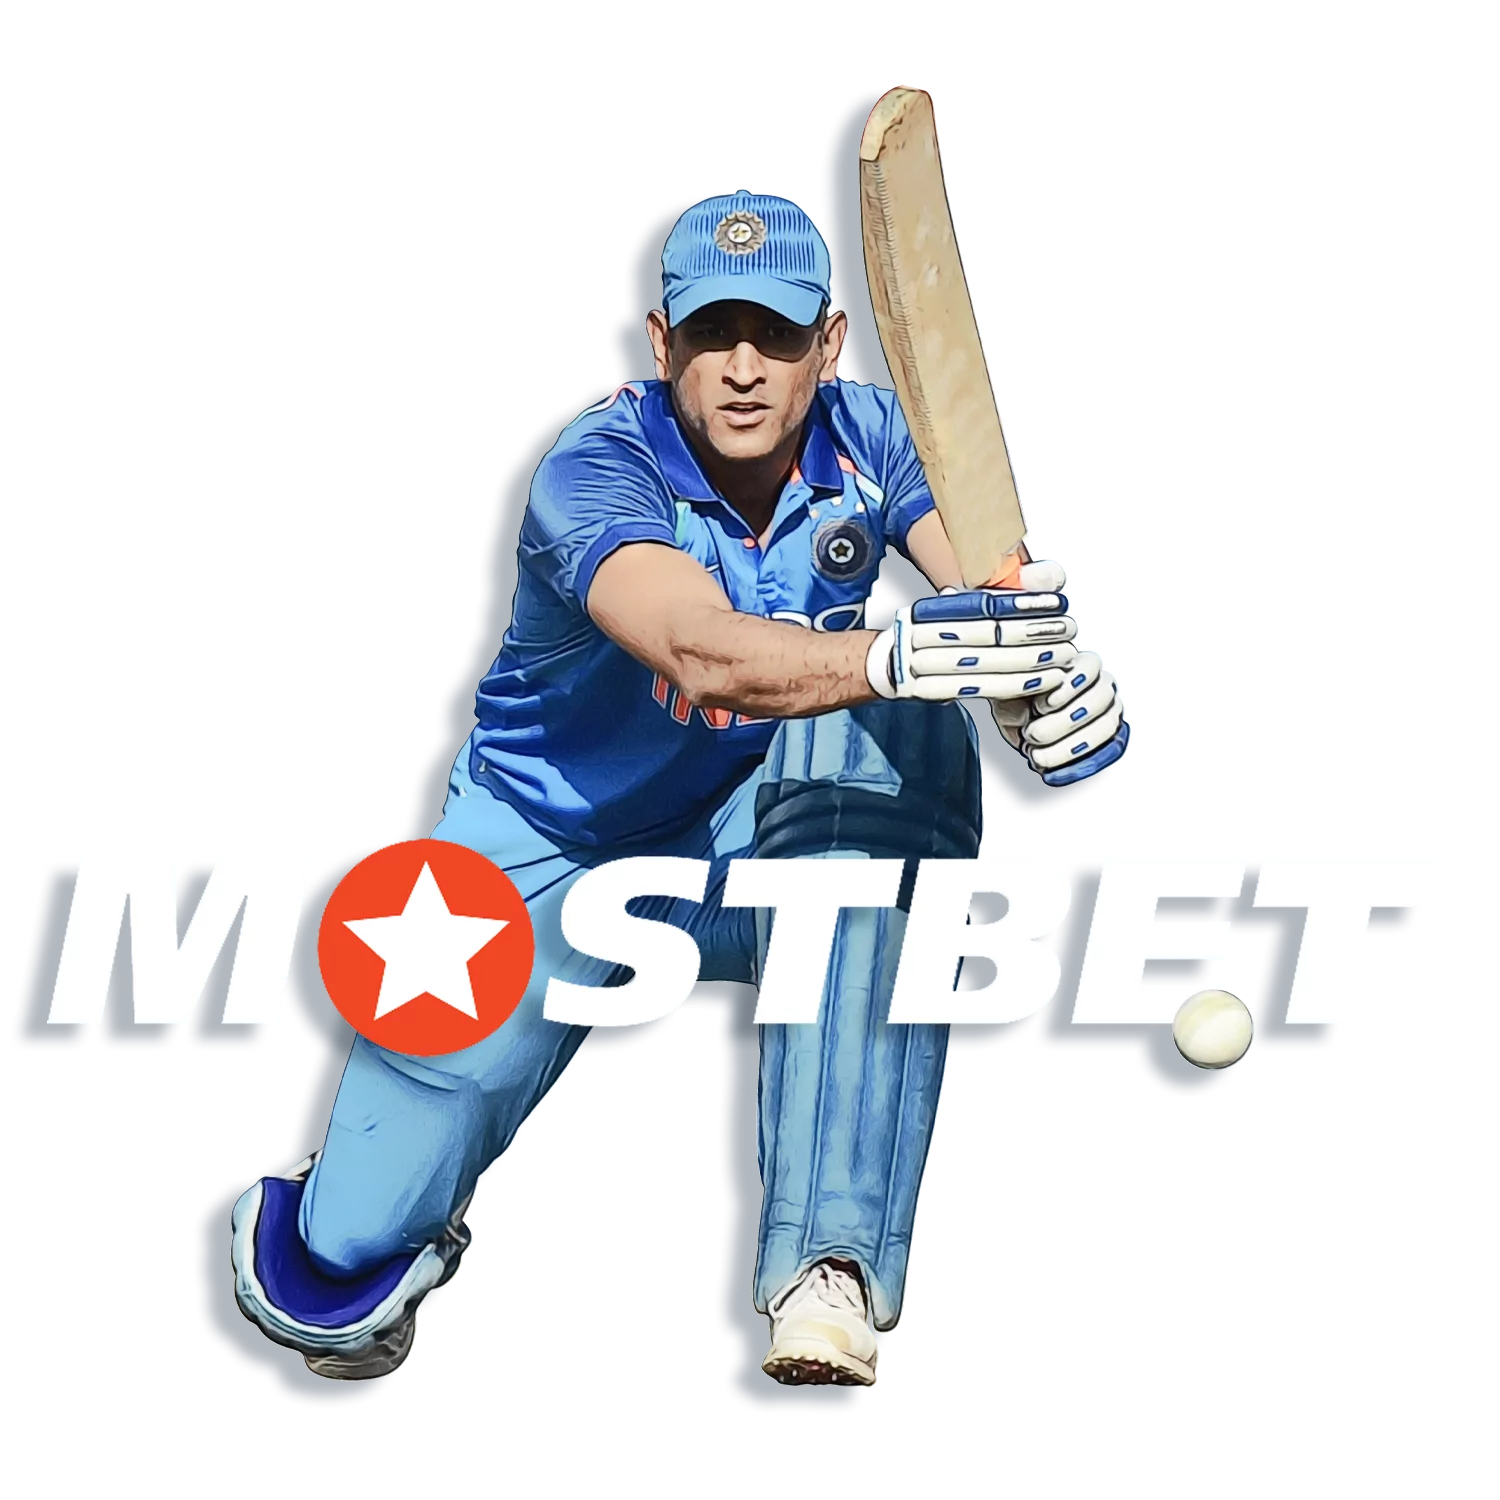 Mostbet - Start betting on sports and play casino games with a bonus of up to INR 25,000.